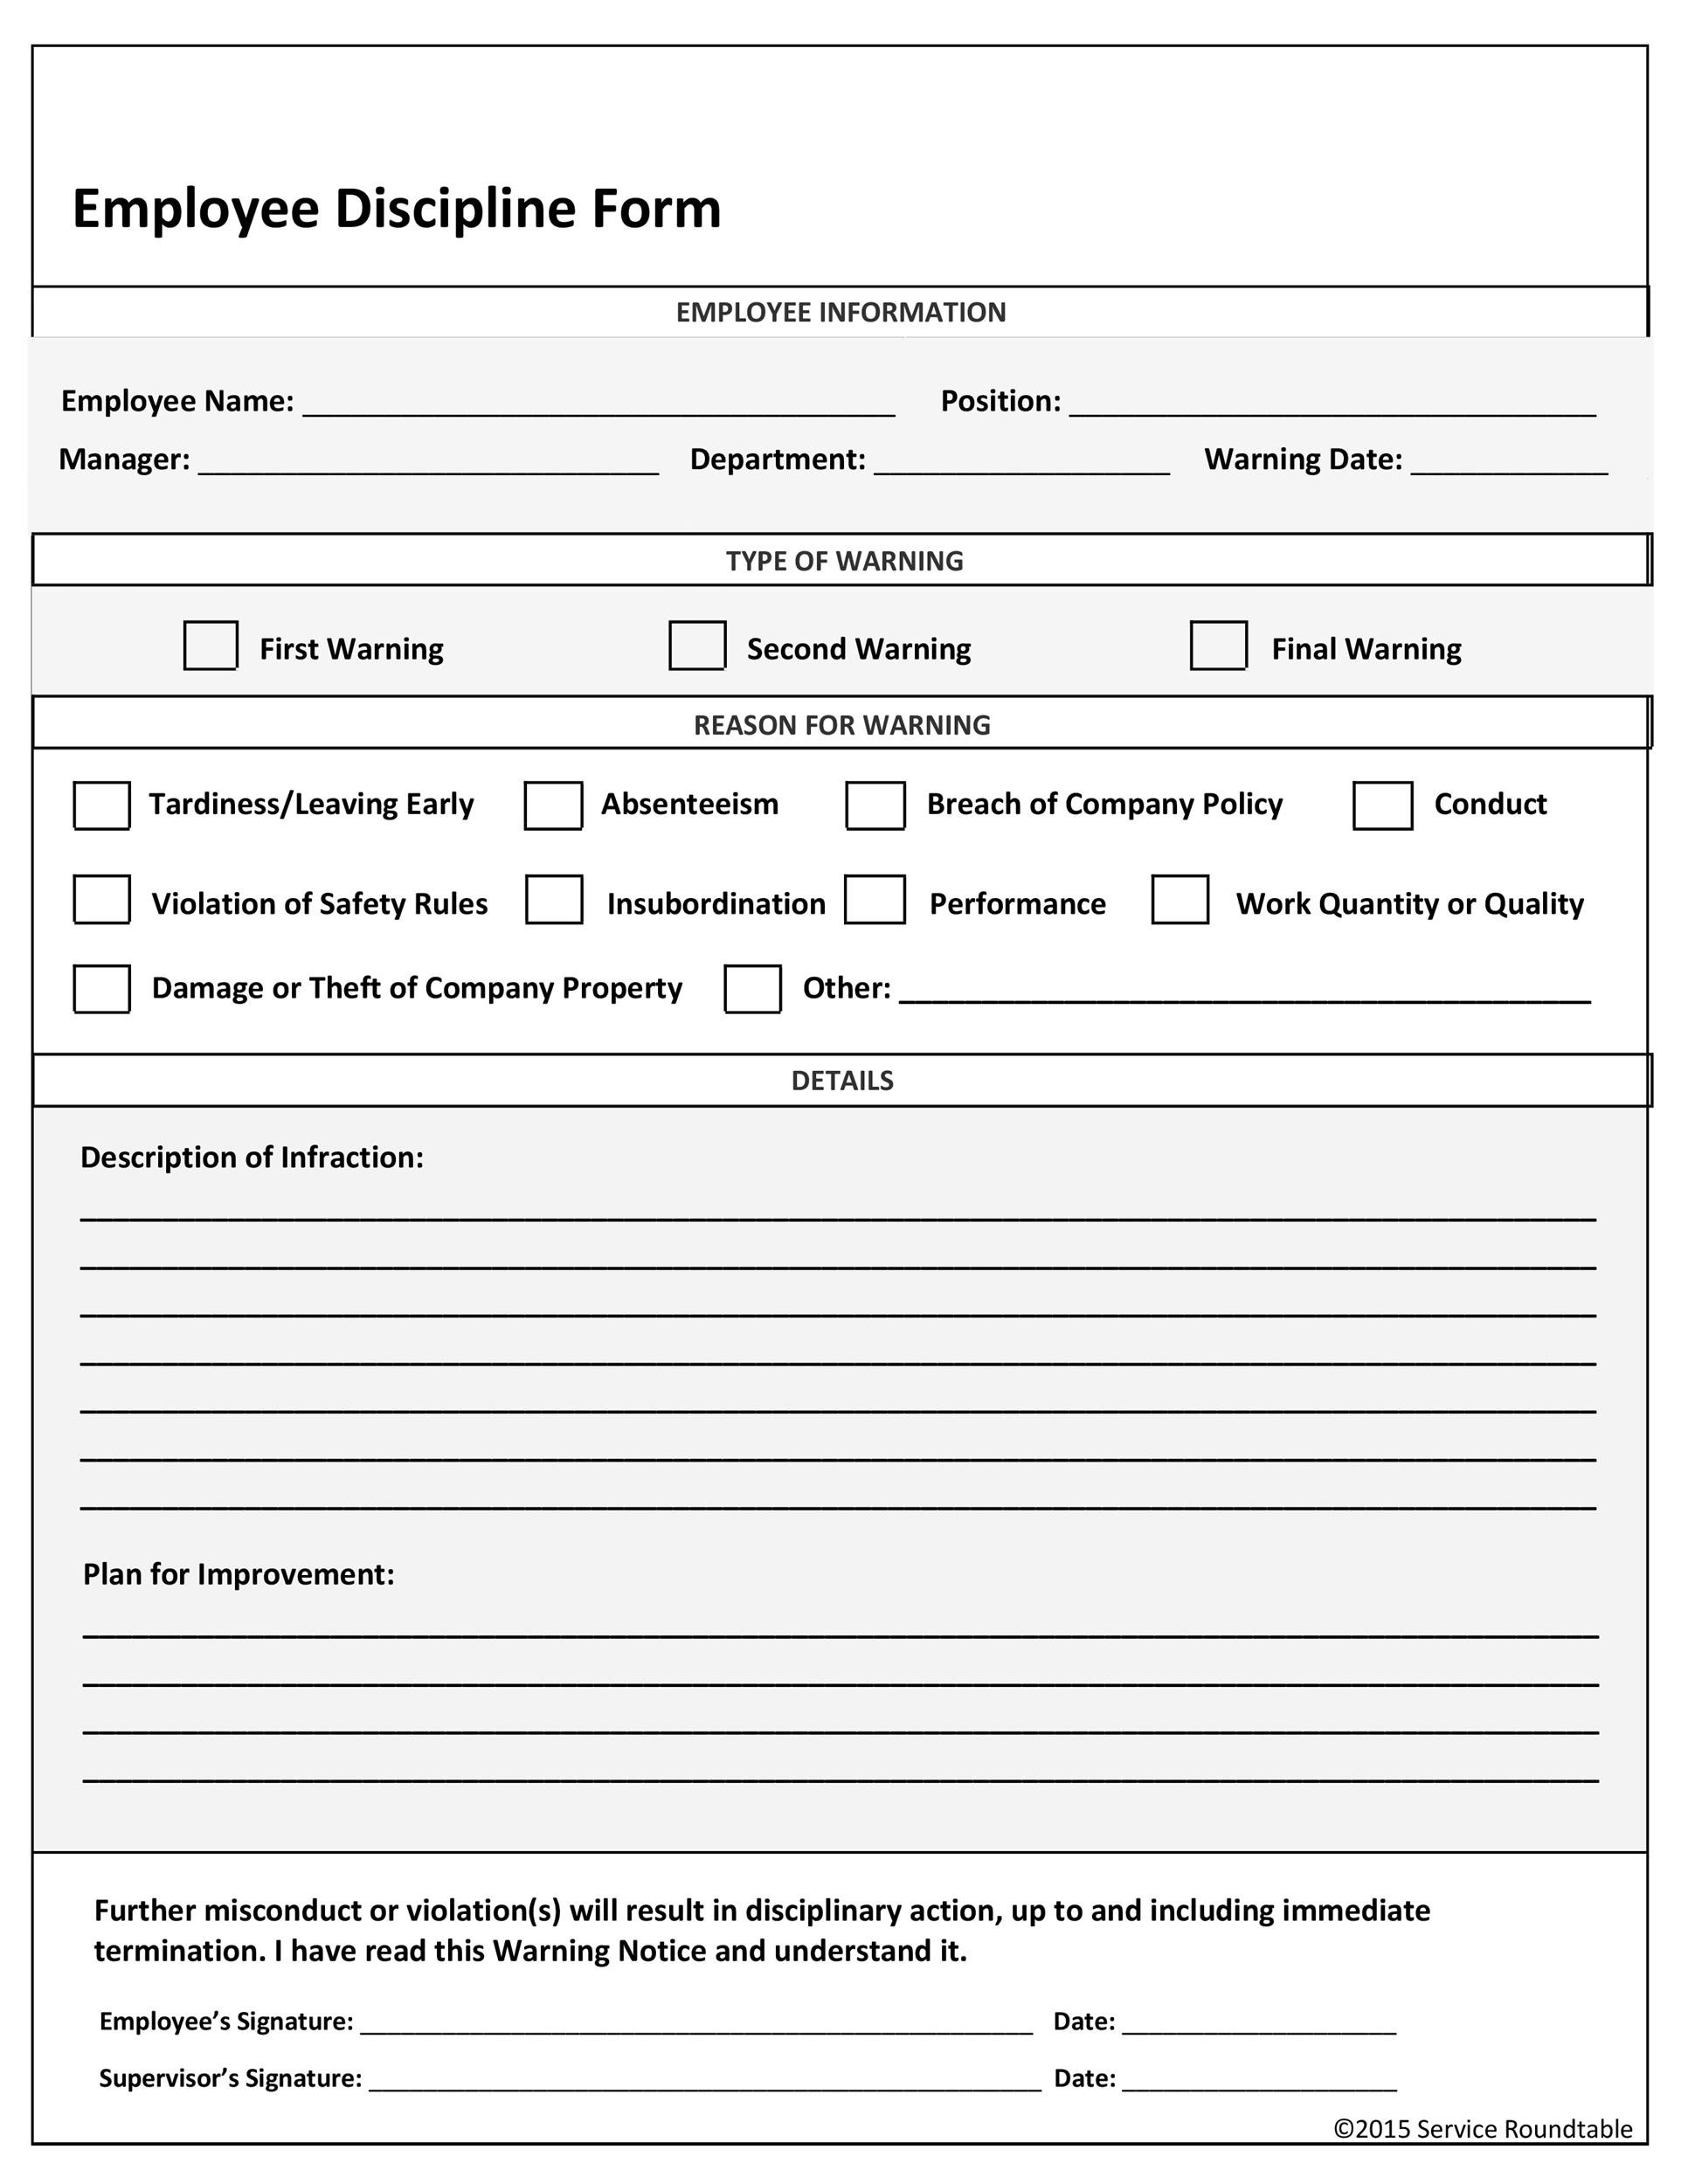 Free Disciplinary Action Form 26